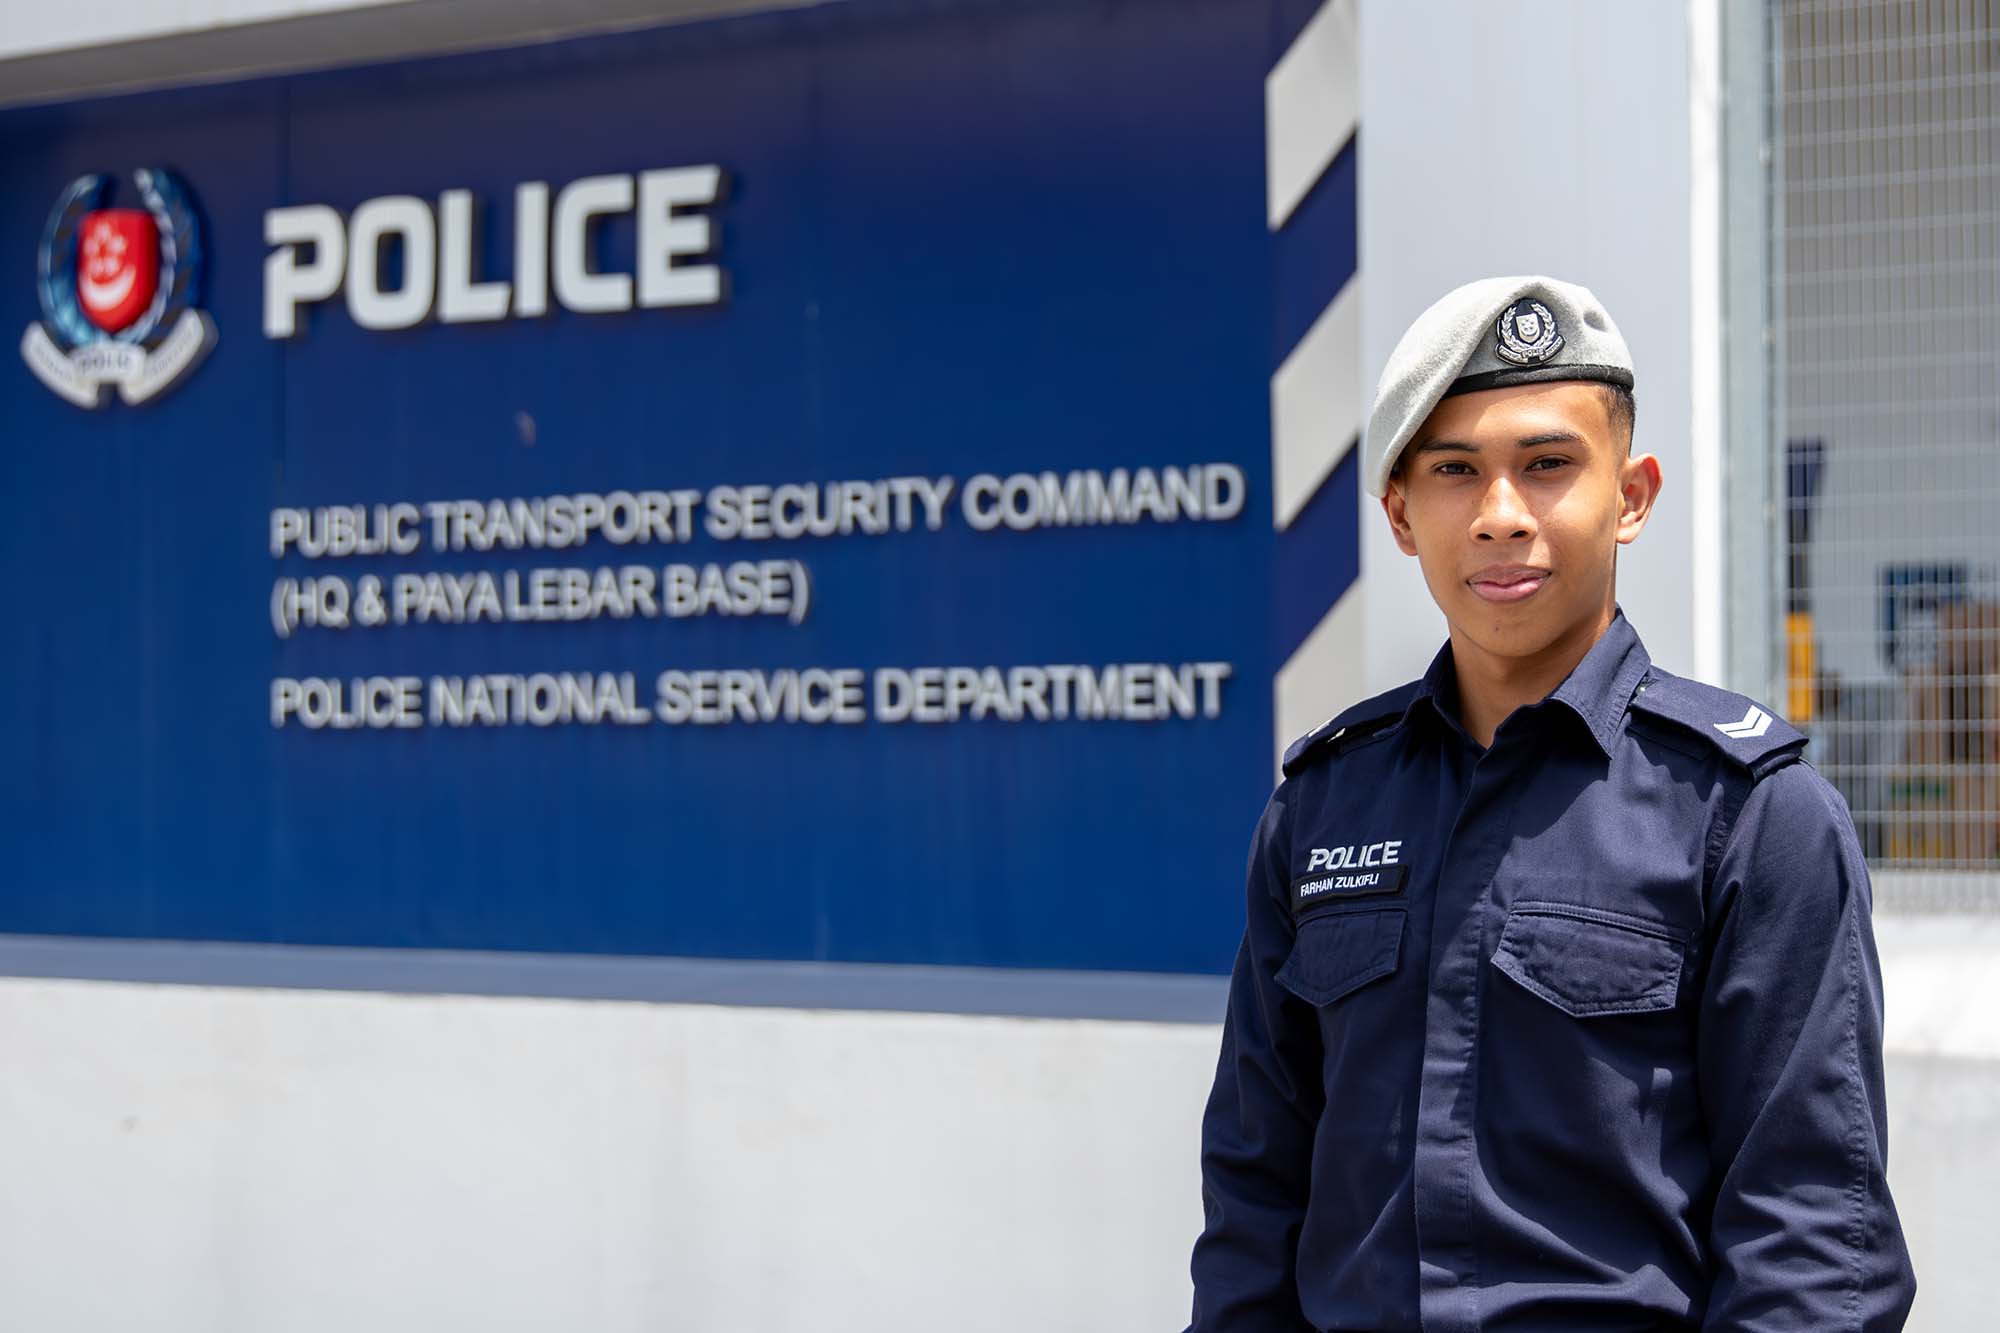 SC/Cpl Muhammad Farhan Zulkifli is leading the charge to train and equip the next generation of TransCom officers. PHOTO: Ryan Yeo Kee Hng